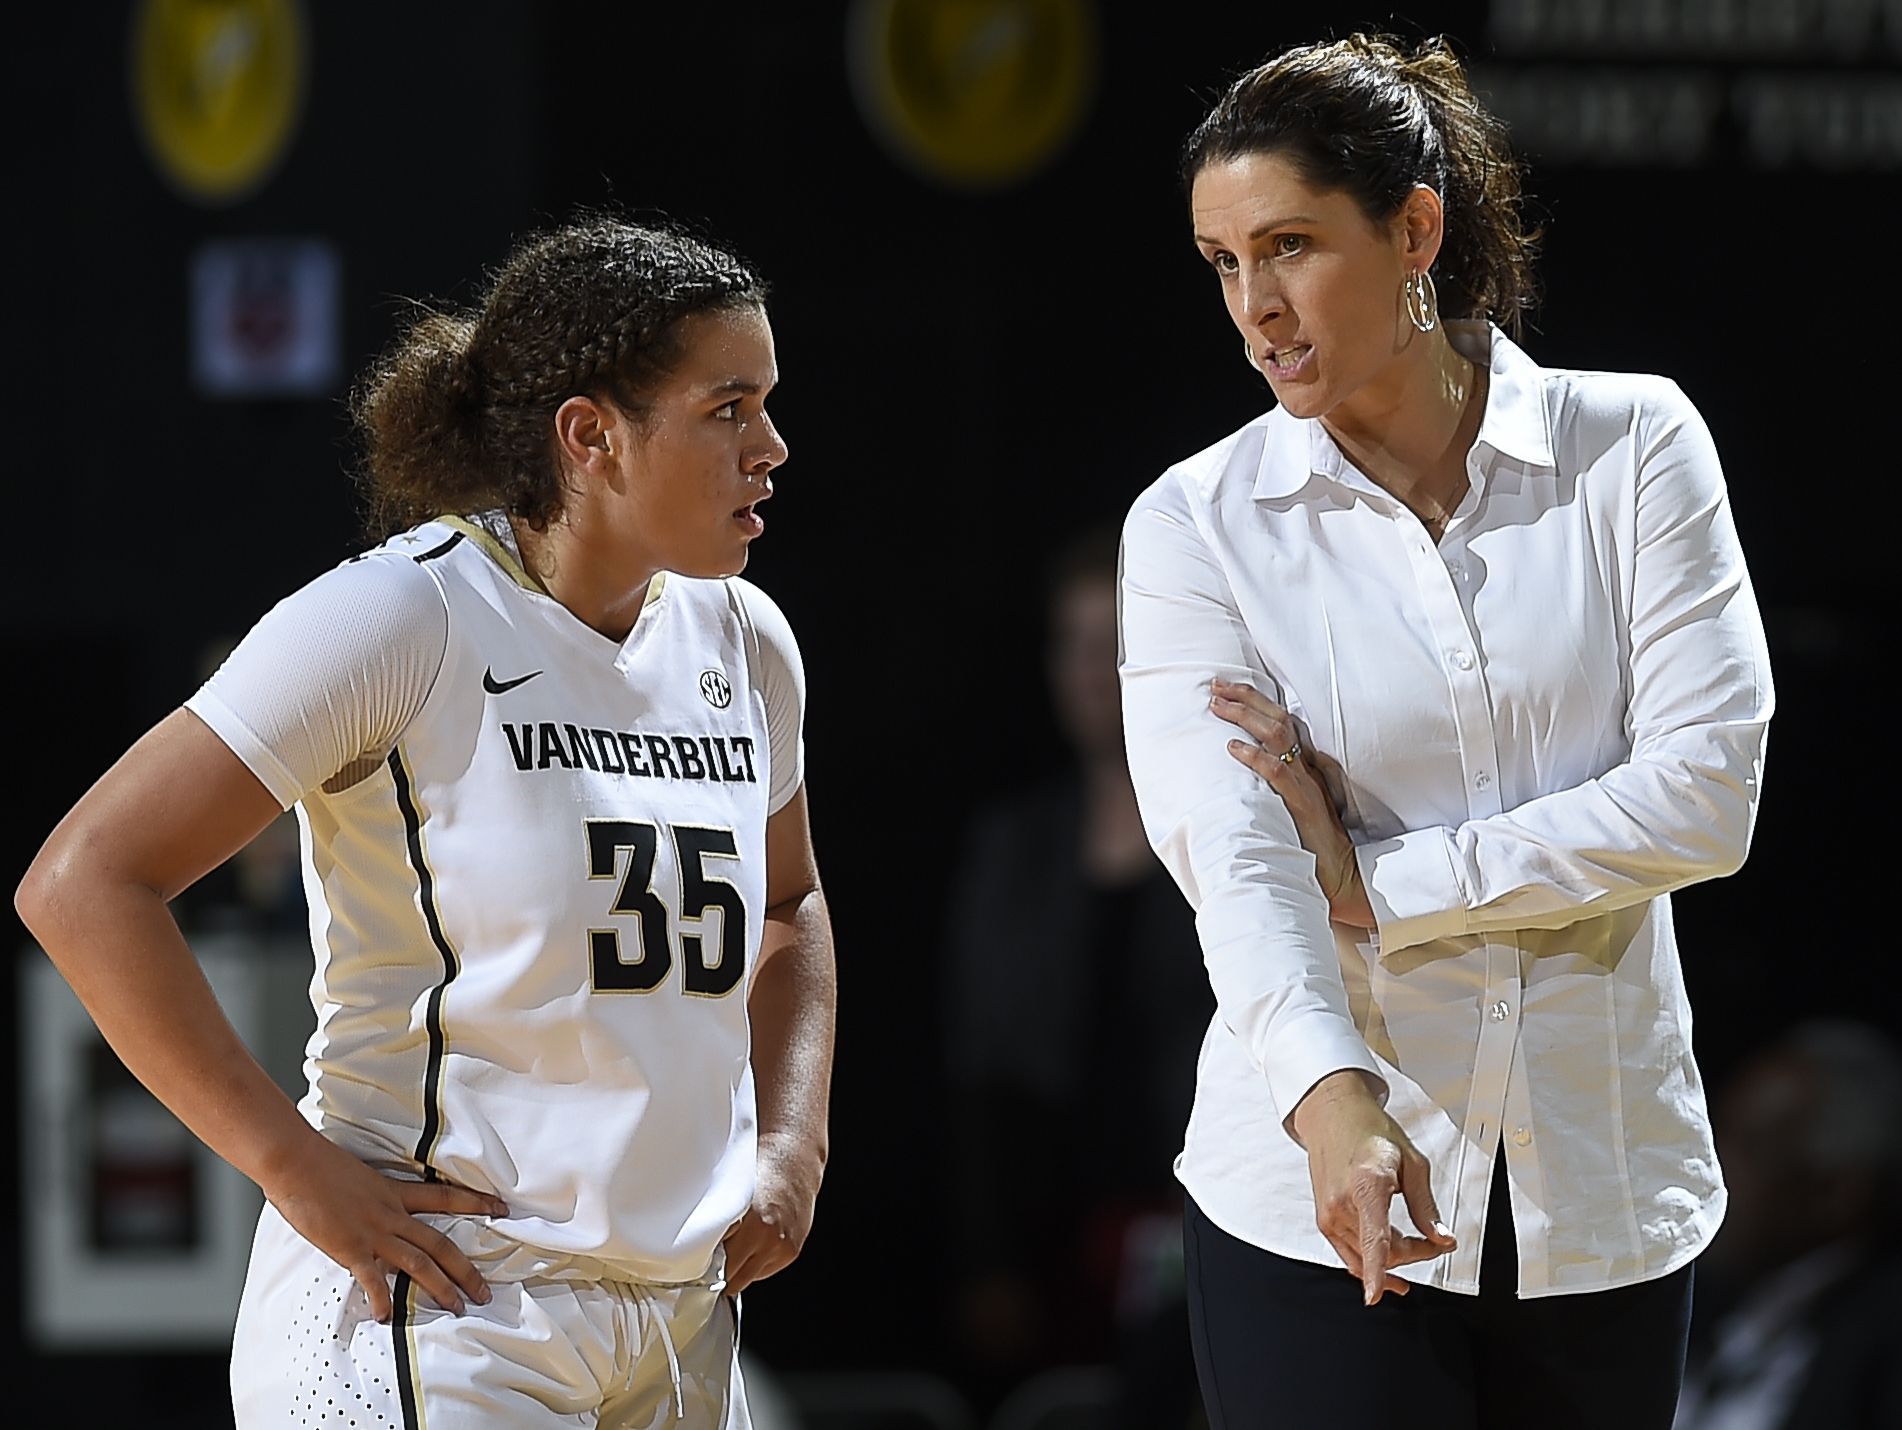 What’s wrong with Vanderbilt women’s basketball? | USA TODAY Sports